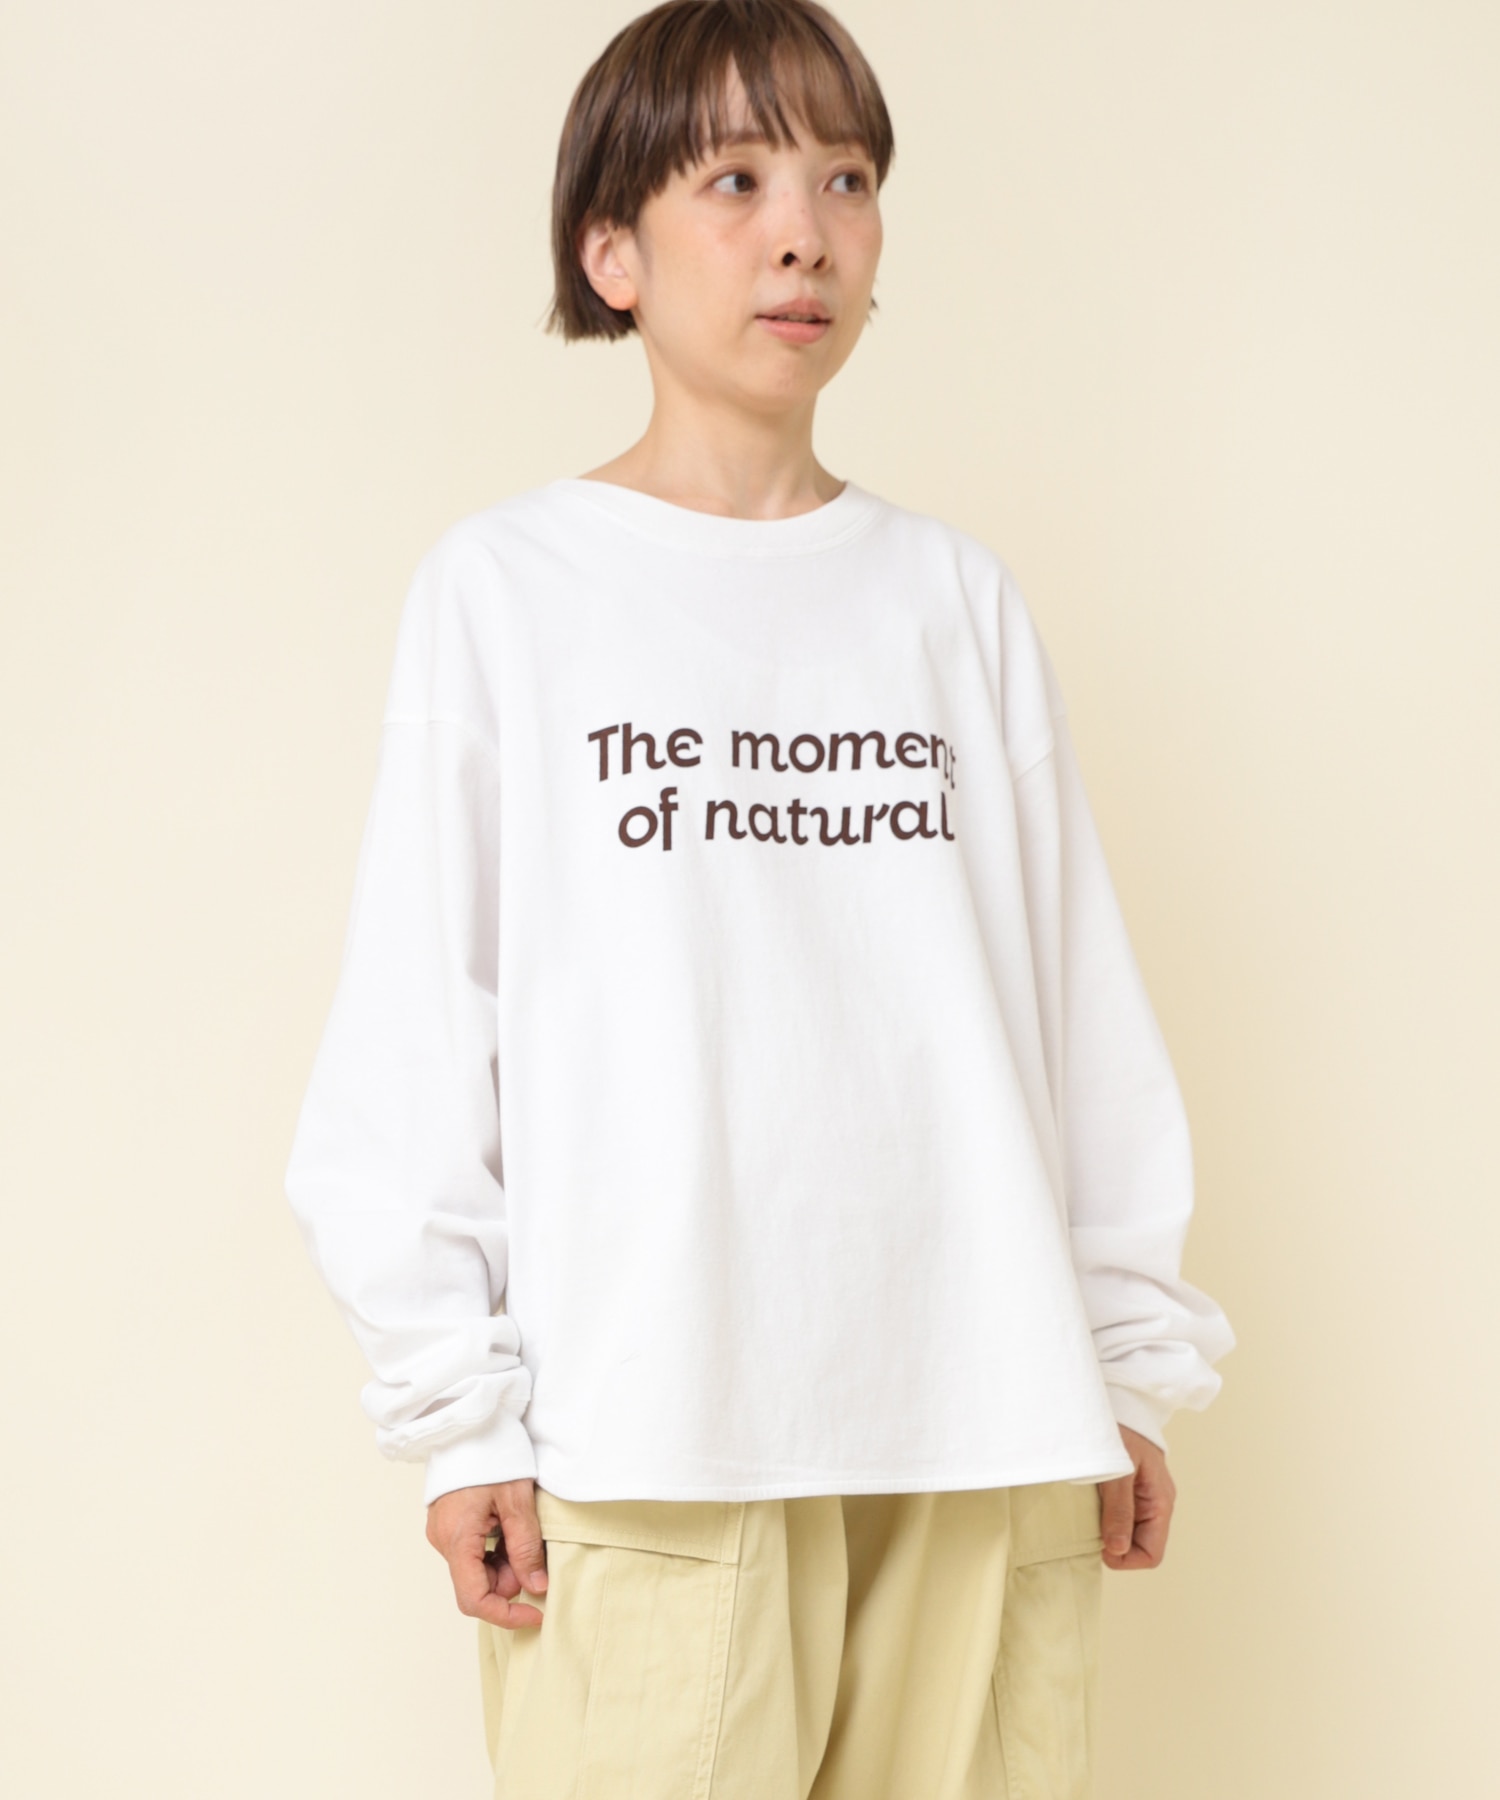 M2205 The moment&Embroidery Tシャツ(M オフホワイト): トップス